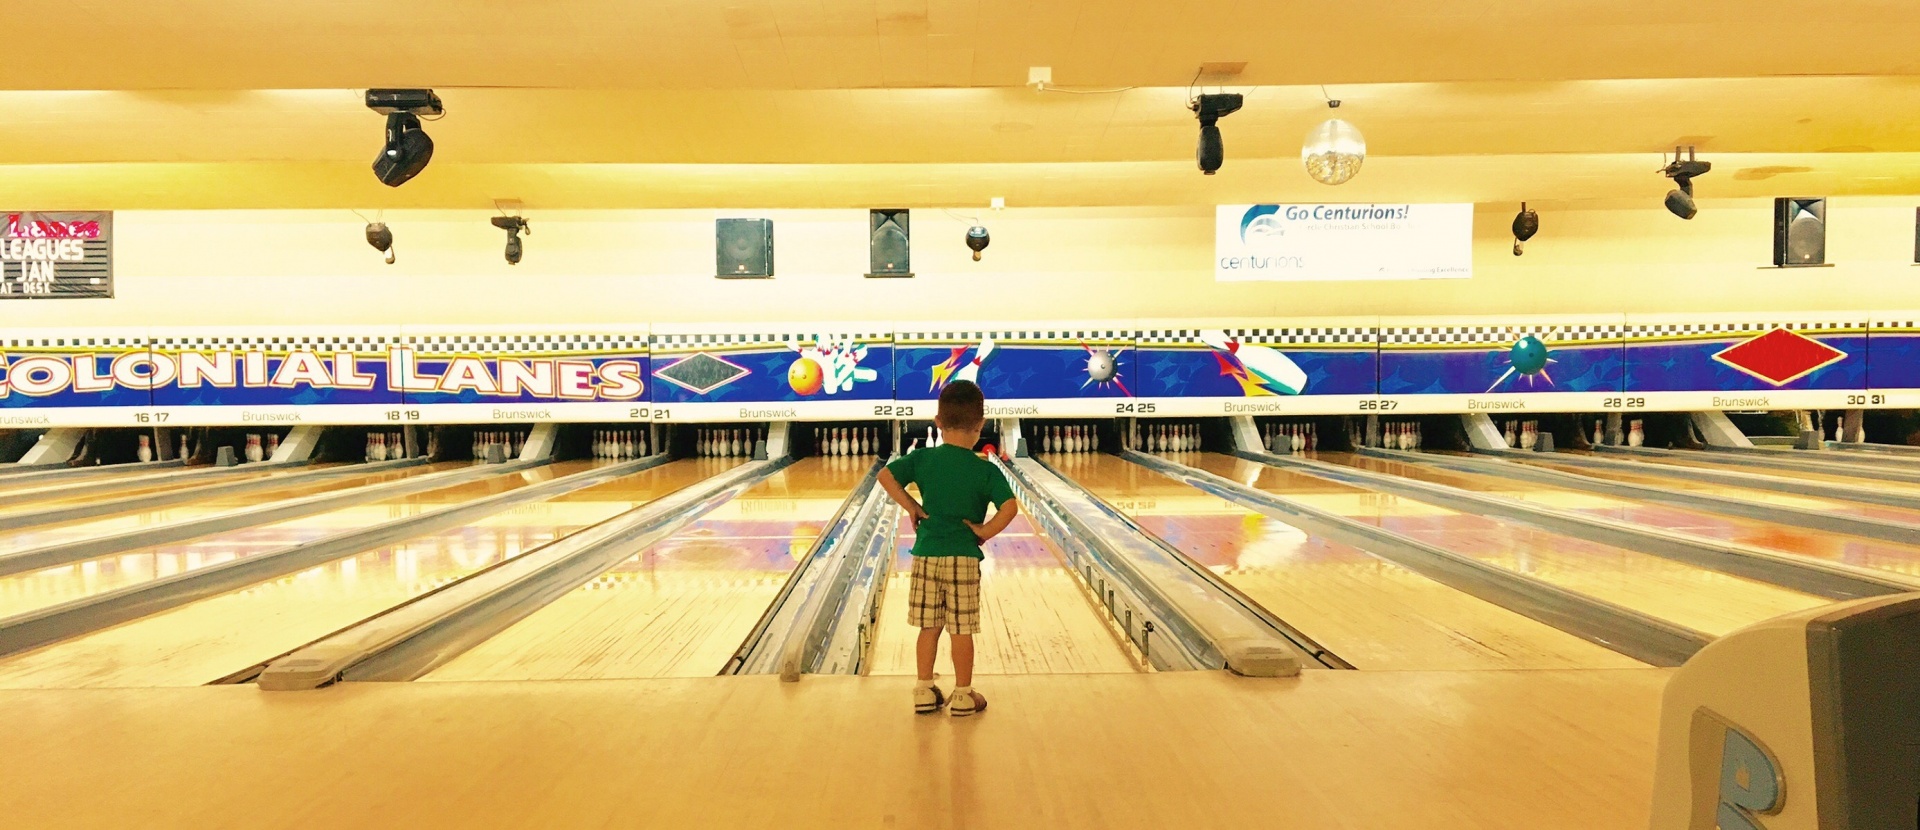 bowling ball alley free photo